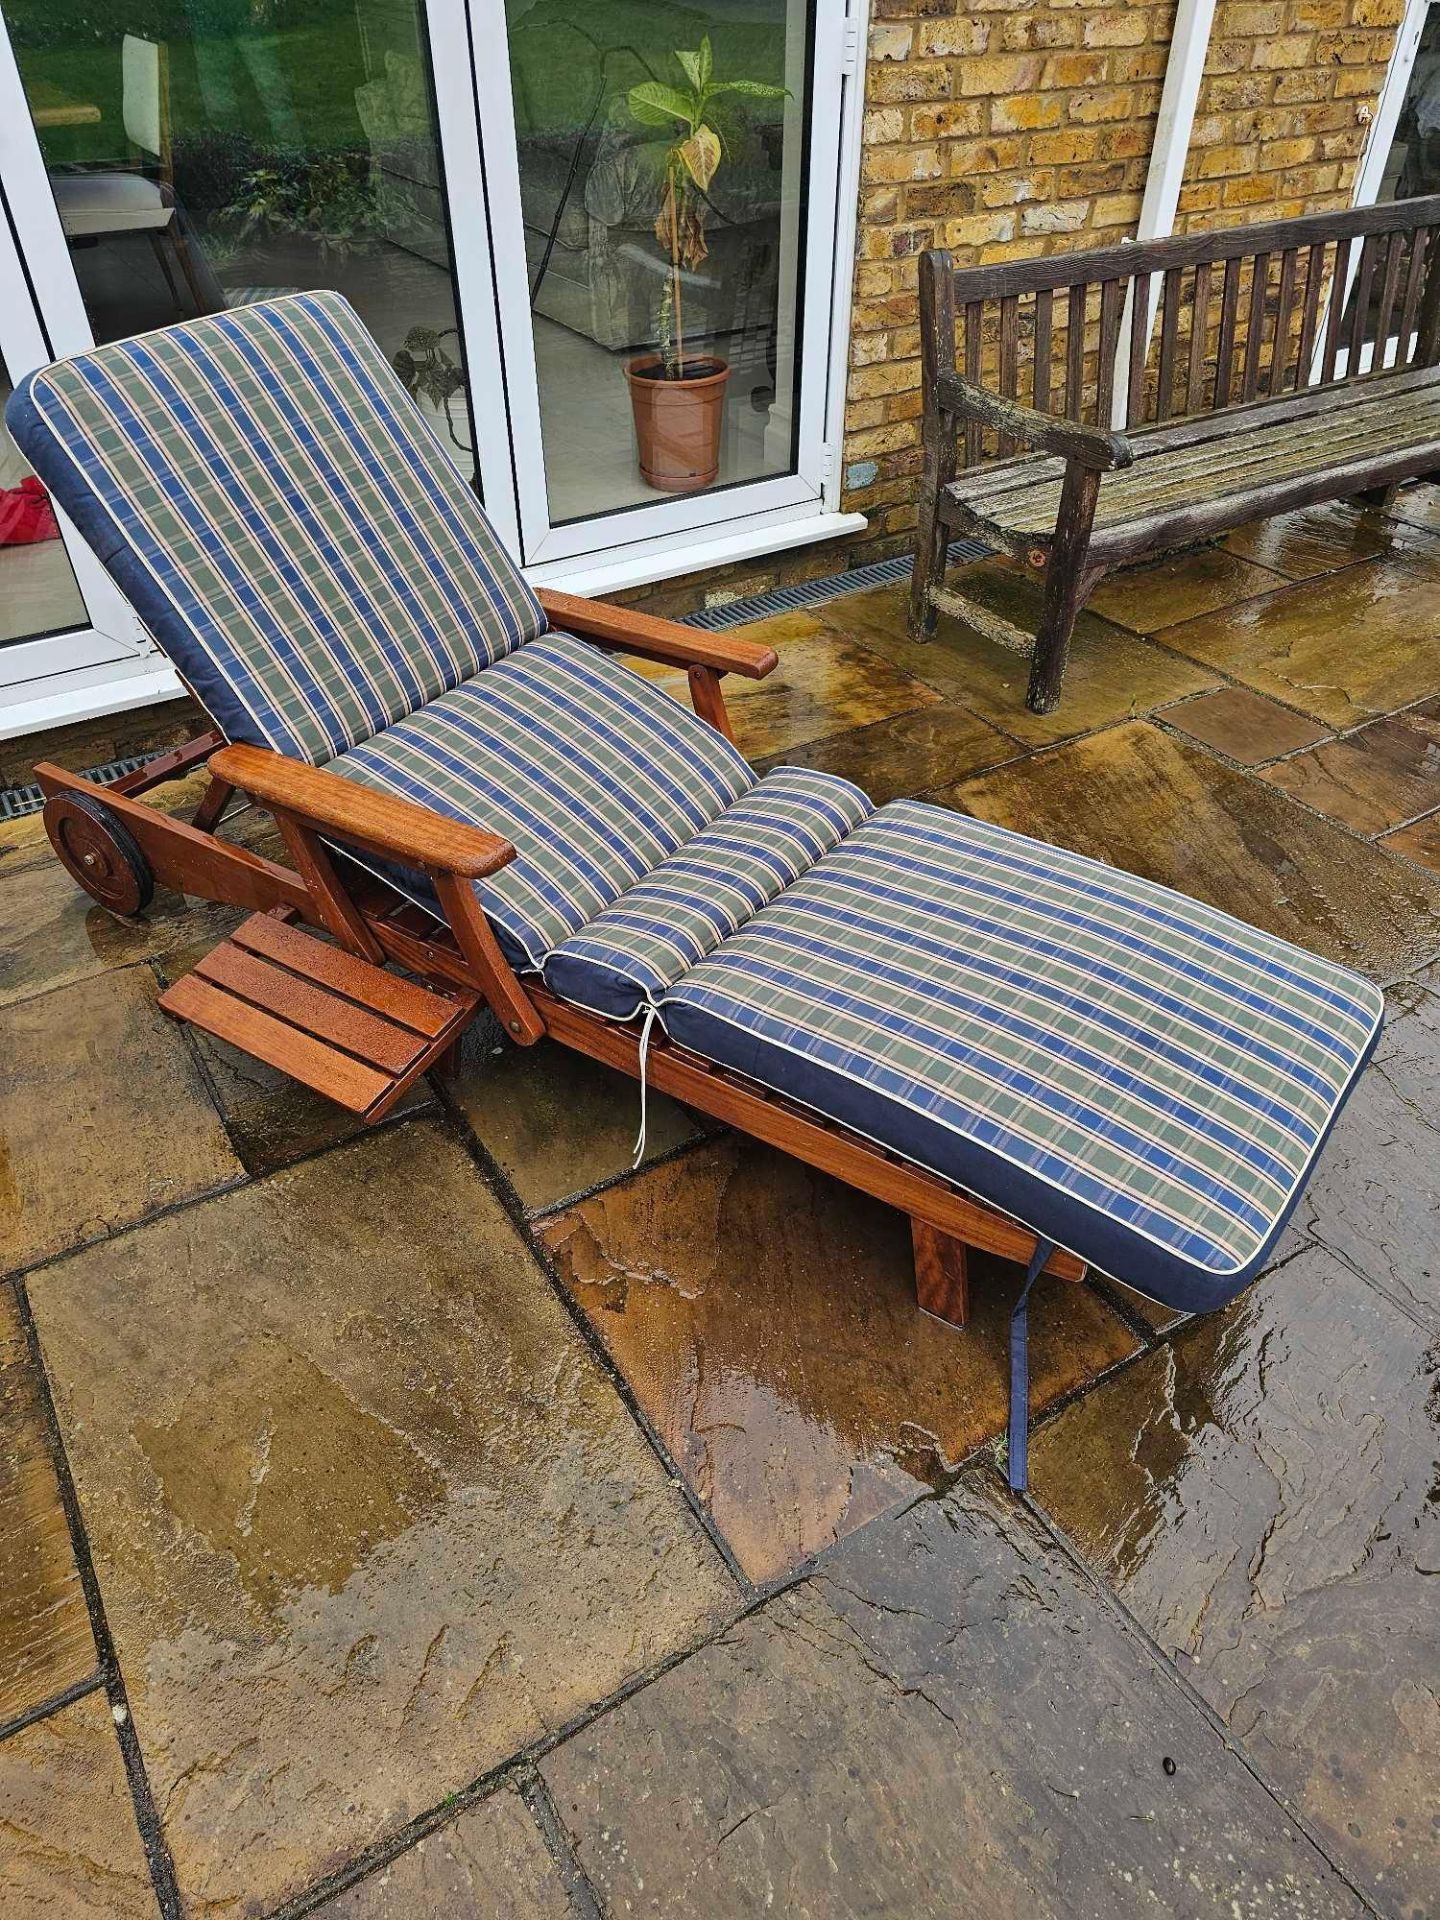 Teak Reclining Sun Lounger With Wheels And Tray Complete With Pad Cushion - Image 4 of 5